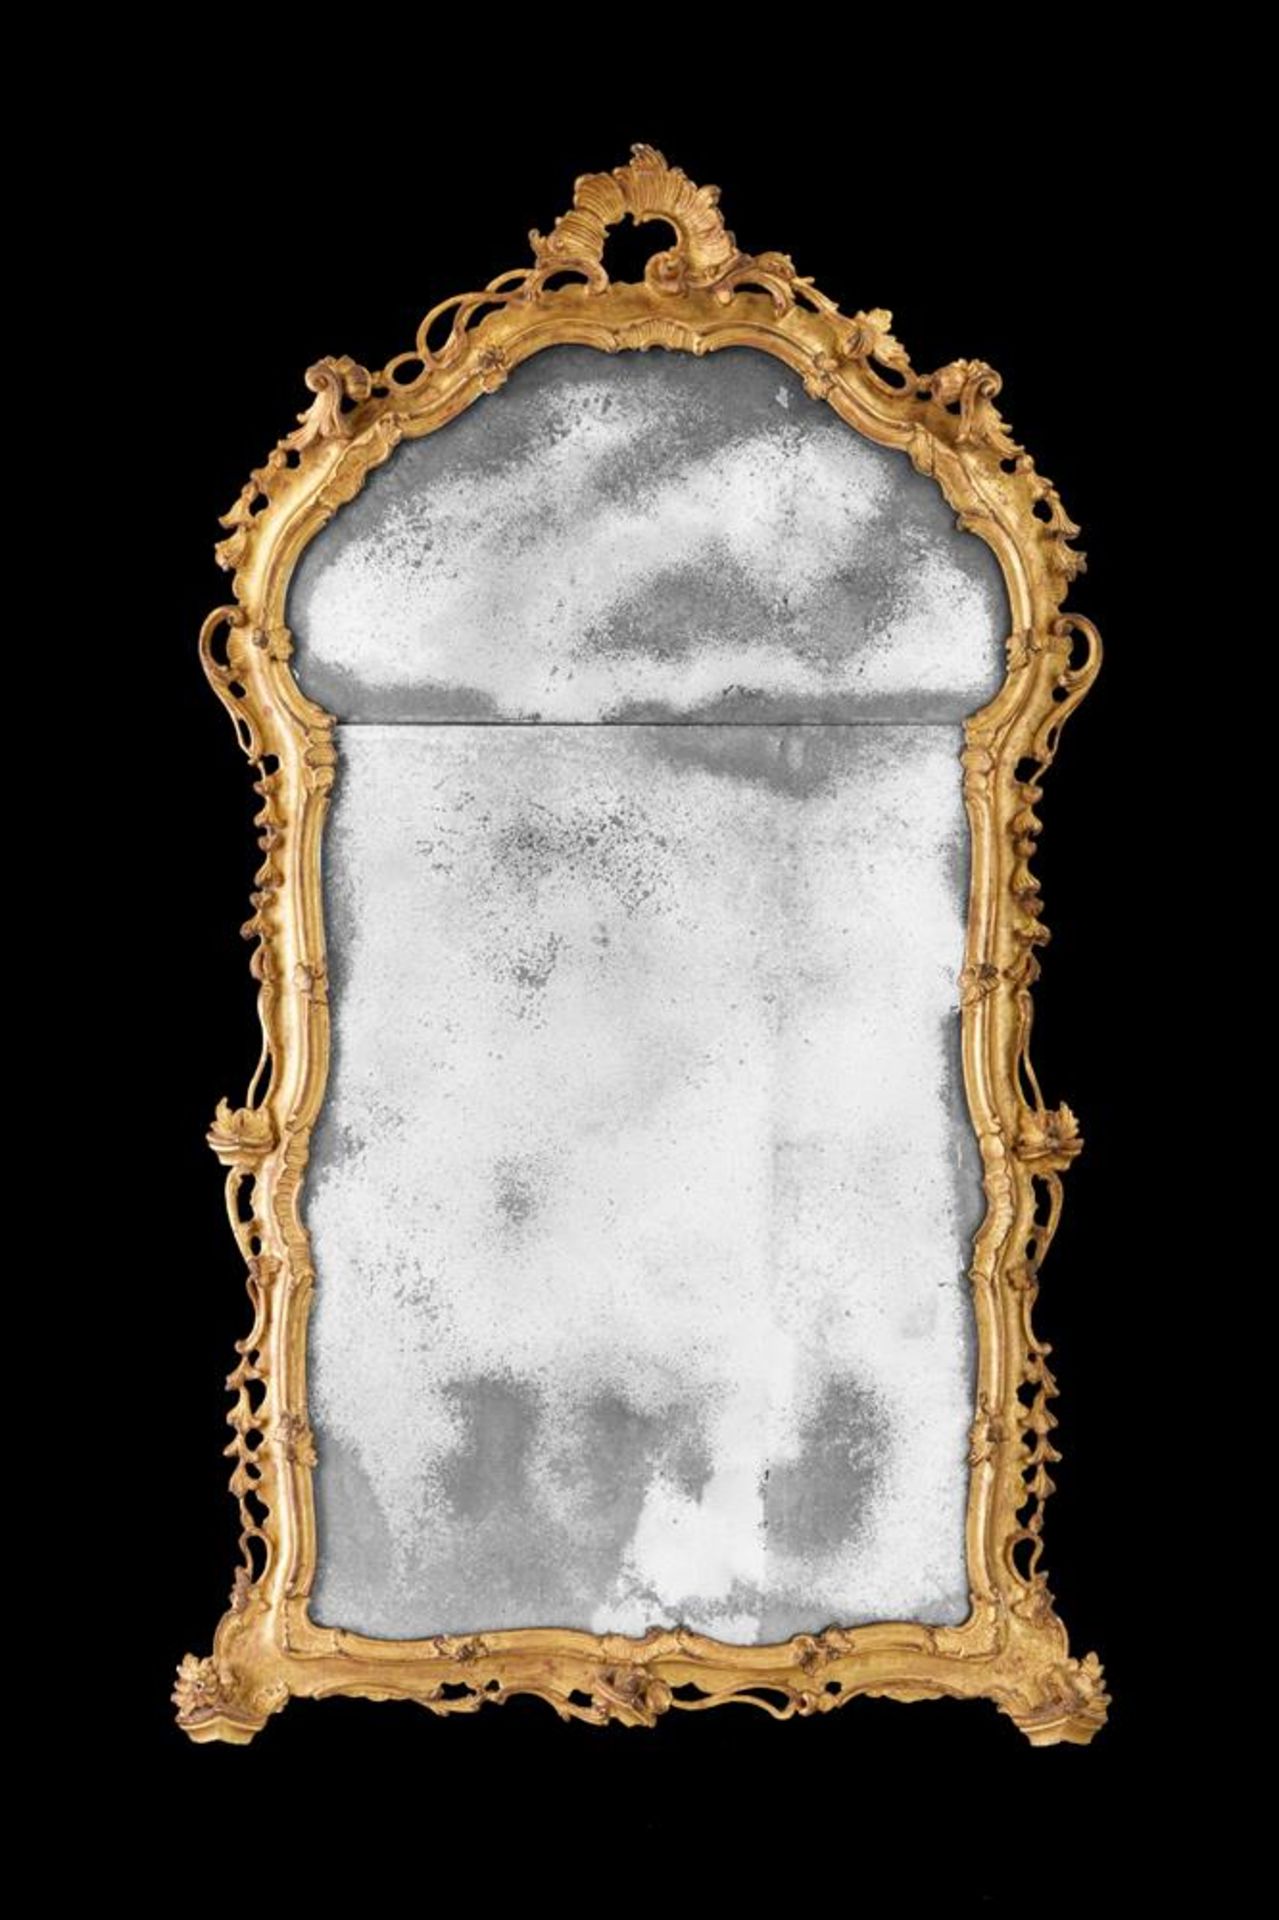 AN ITALIAN CARVED GILTWOOD WALL MIRROR, MID 18TH CENTURY